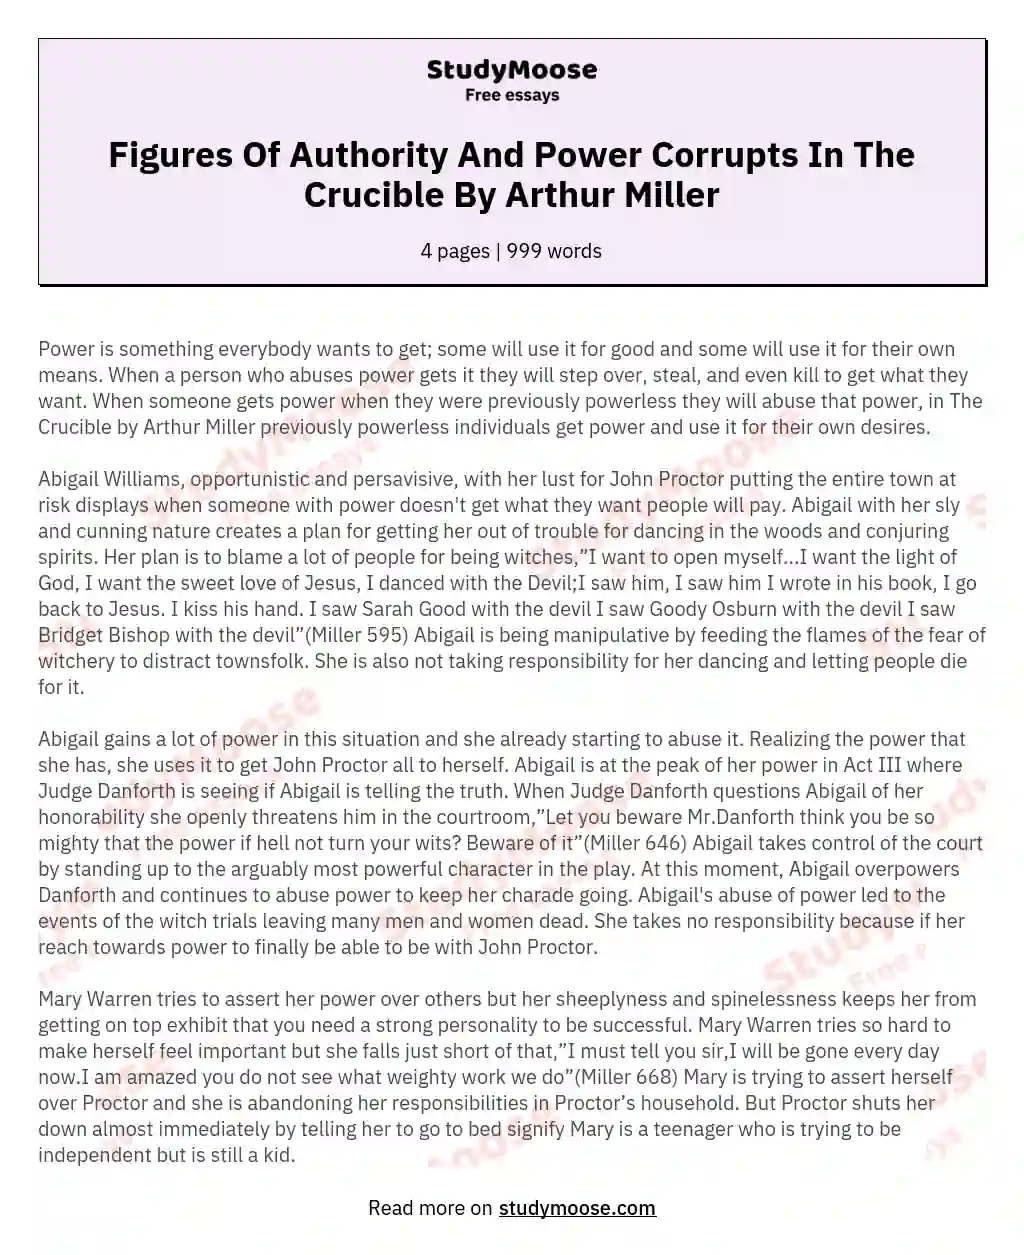 Figures Of Authority And Power Corrupts In The Crucible By Arthur Miller essay